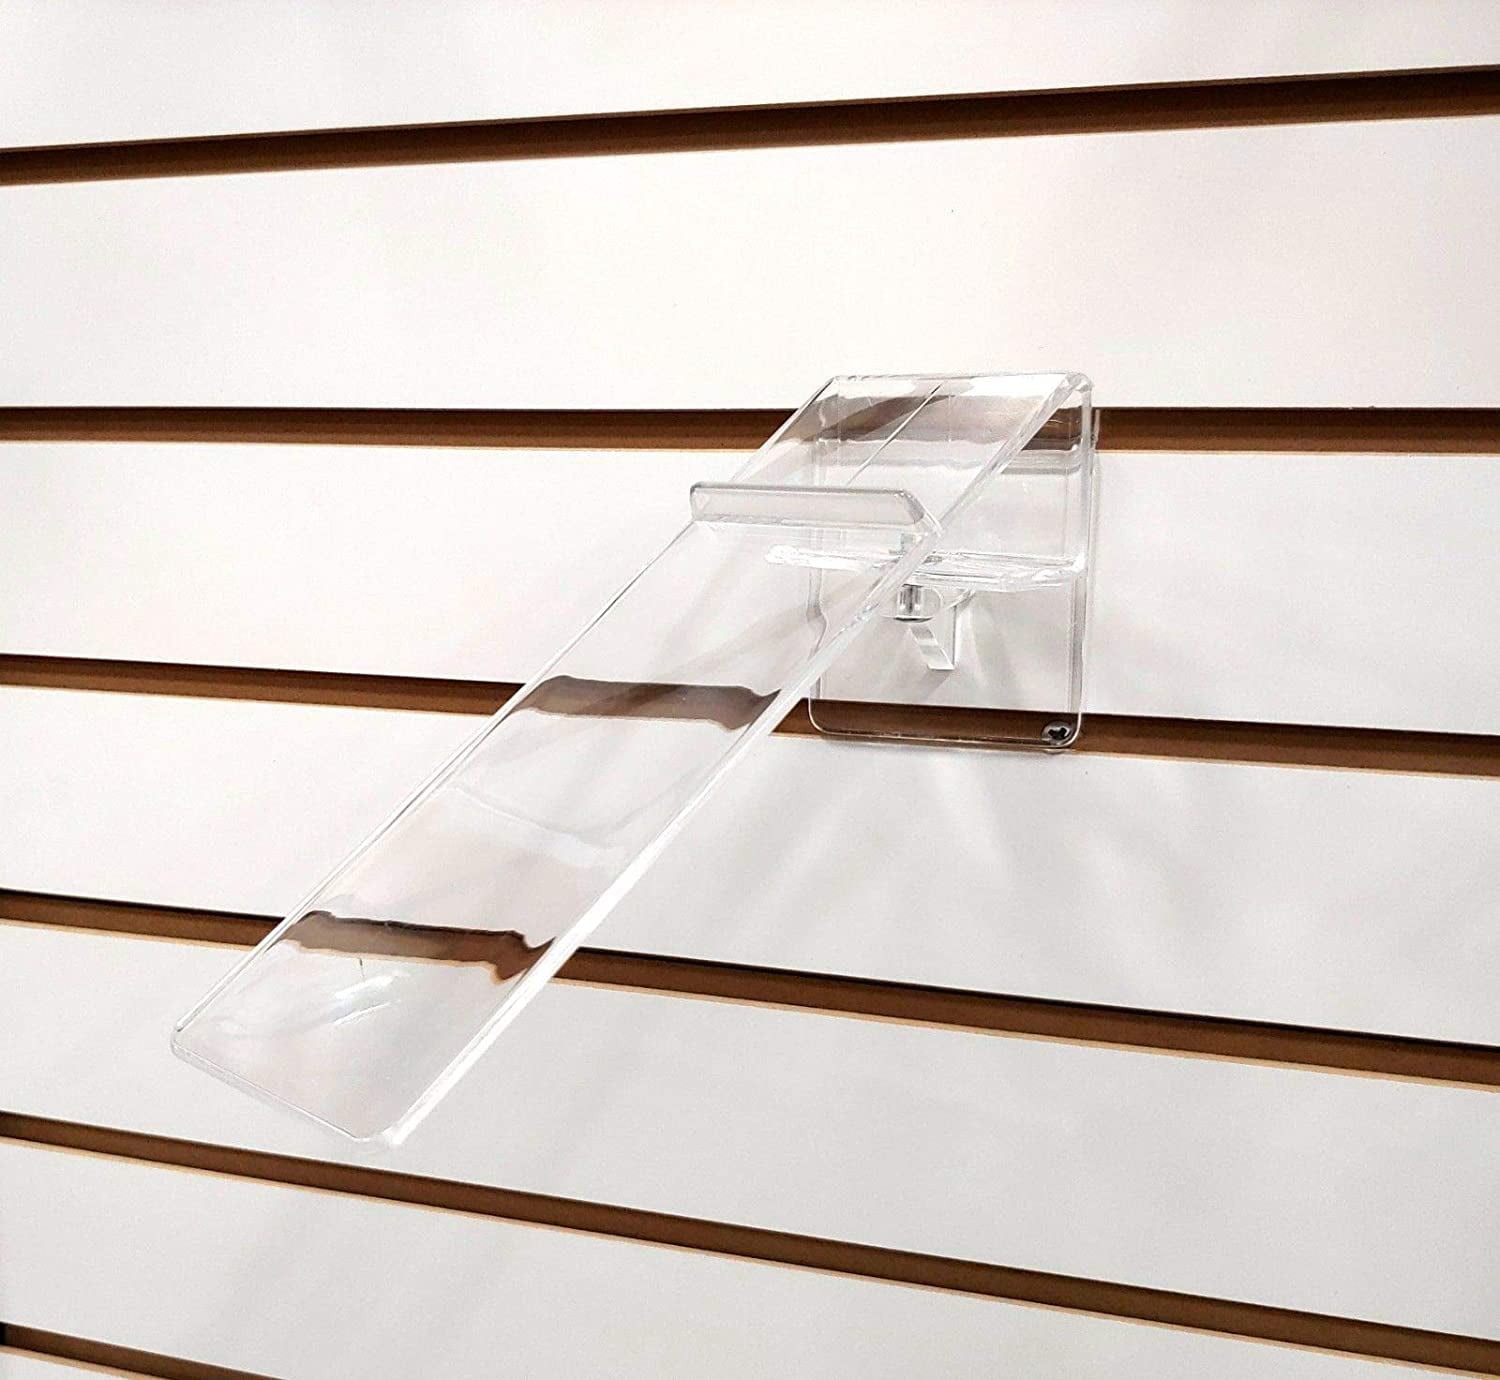 4 Pc Clear Acrylic Vertical Single Shoe Display Fixture Stand Retail Heels Slant 